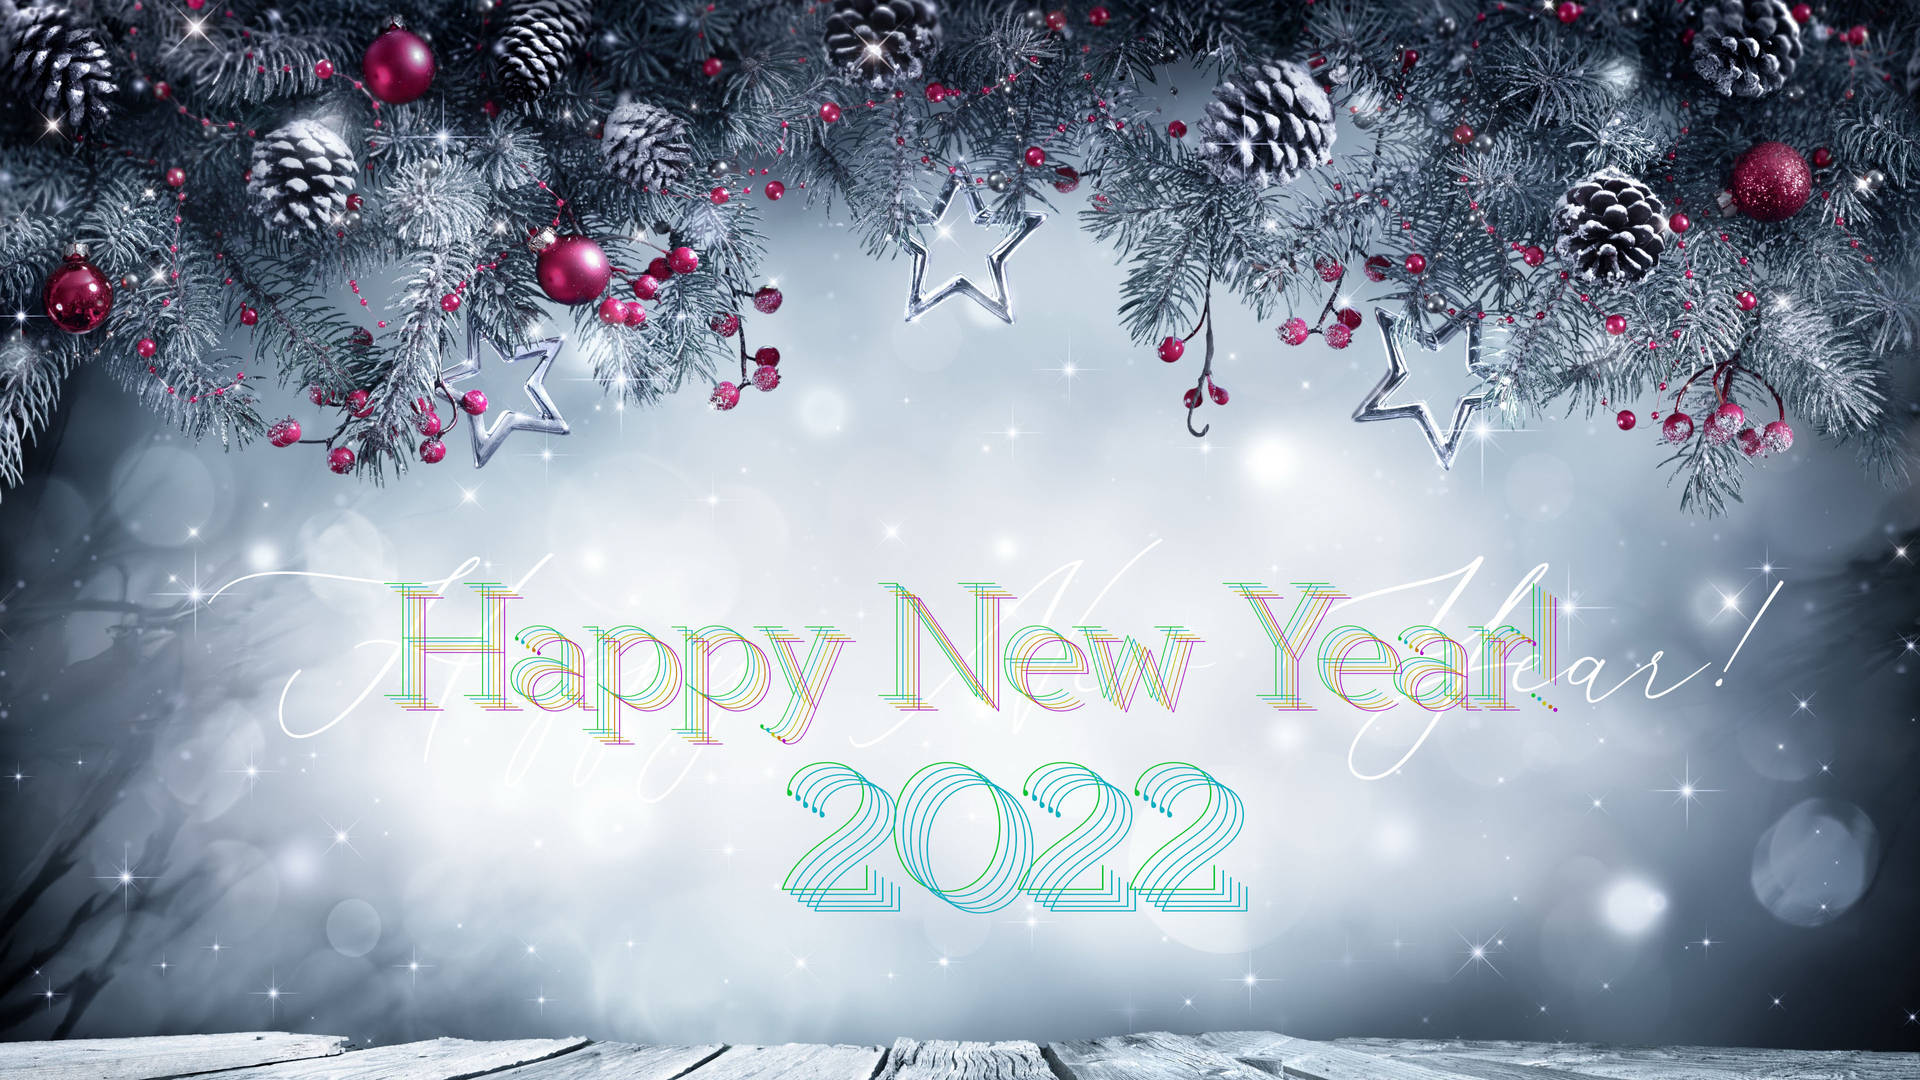 Ringing In 2022 With Style - A Spectacular New Year's Celebration Background